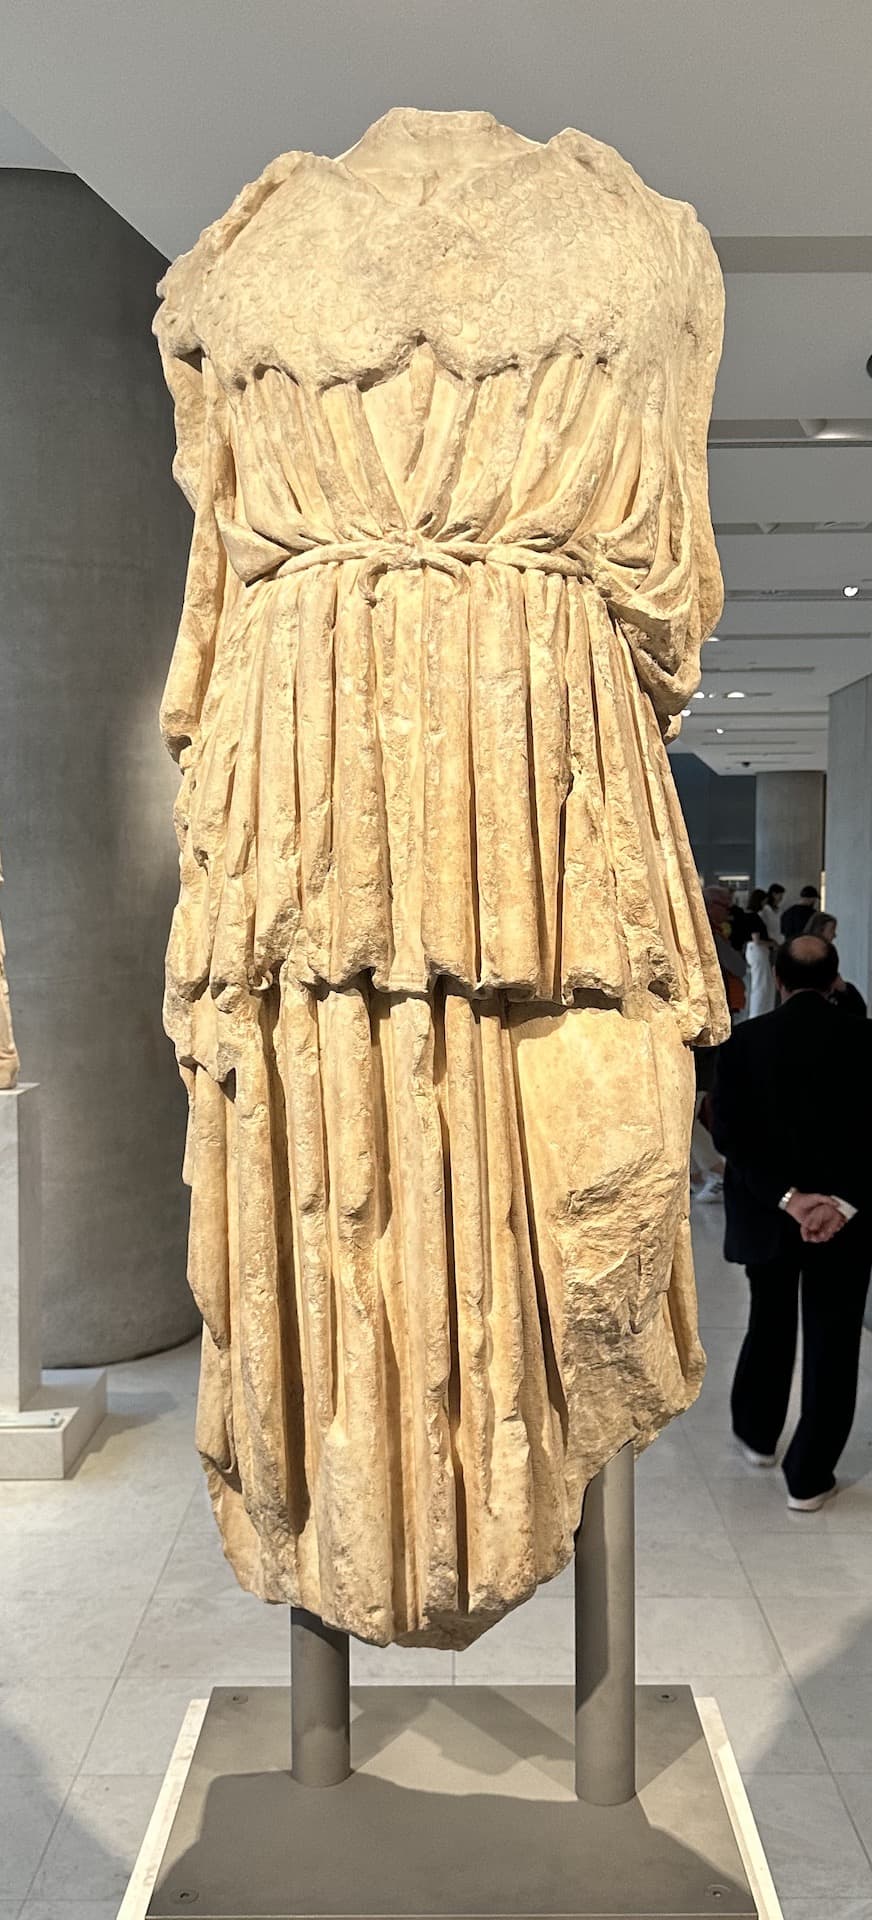 Copy of the statue of Athena Parthenos; second half of the 2nd century